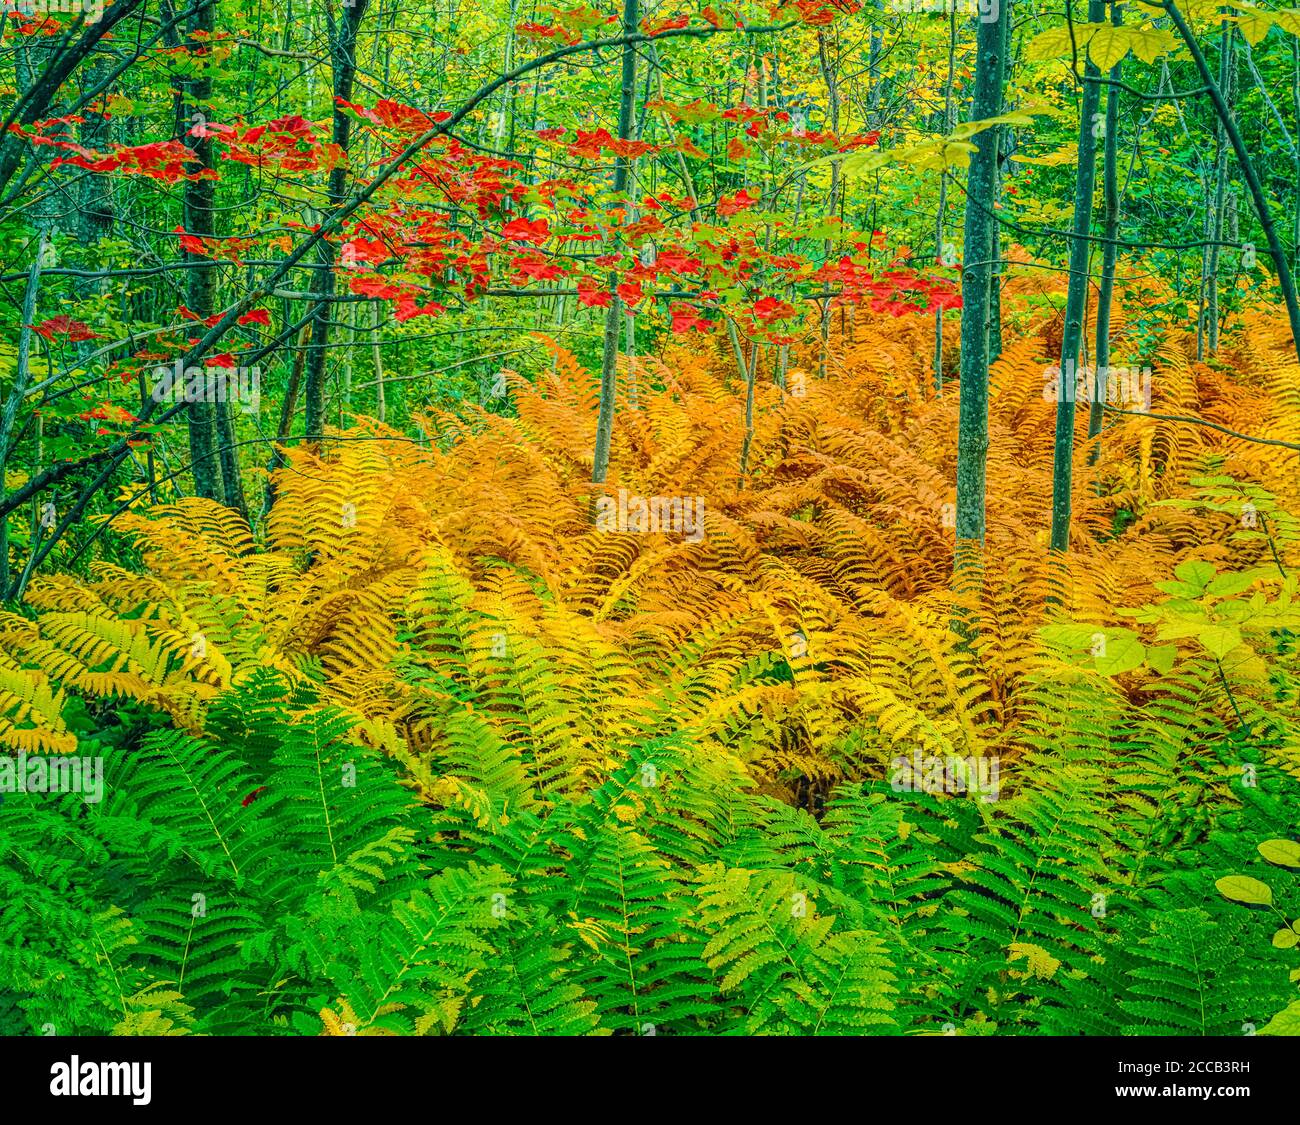 Golden and green ferns in fall cover the forest floor and red Maple leaves hang above. This is autumn in Acadia National Park in Maine, USA. Stock Photo